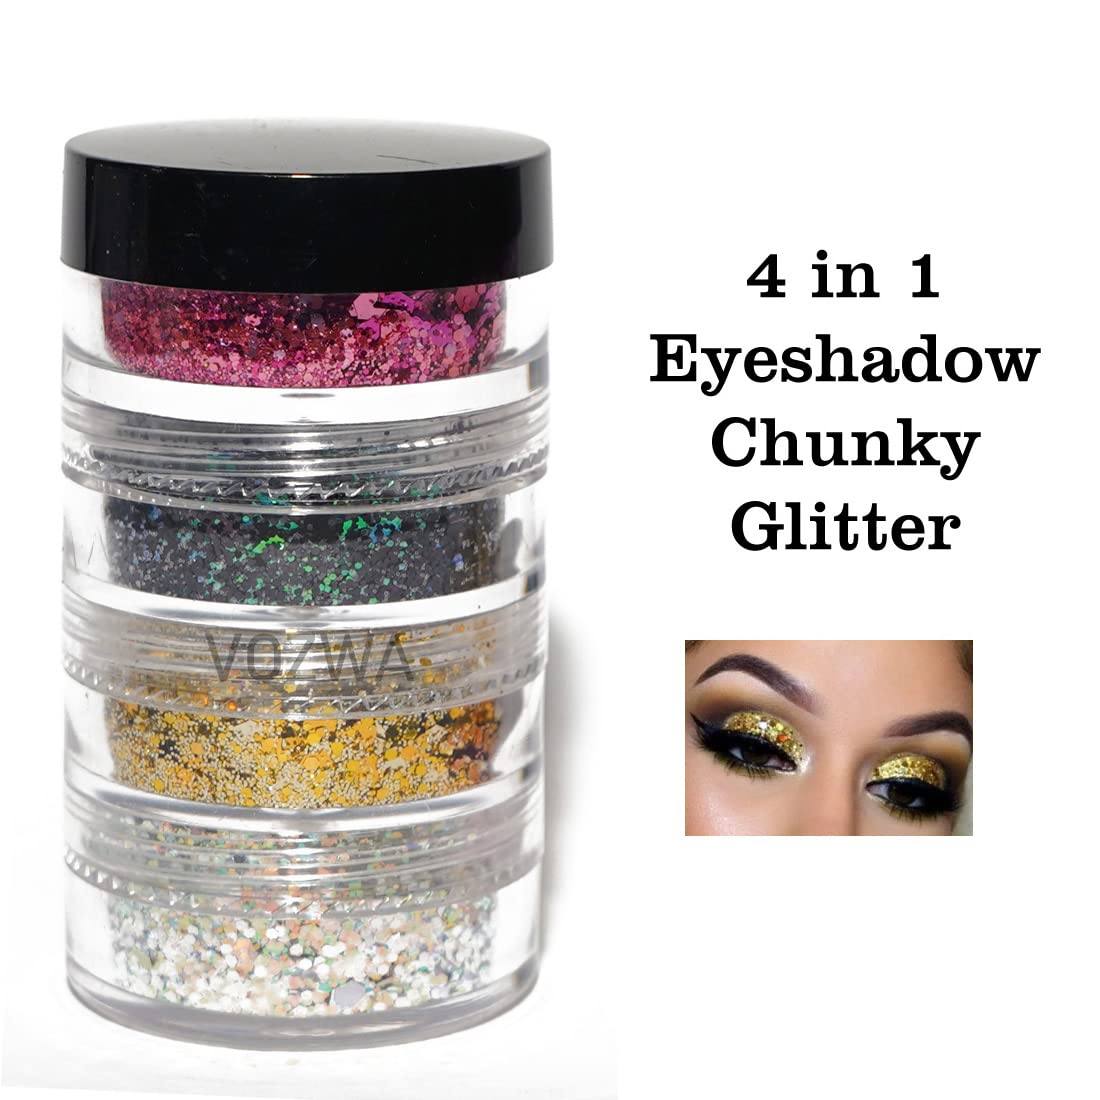 Vozwa 4 in 1 Eyeshadow Chunky and Fine Glitter Mix - (Pink + Black + Golden + Silver)